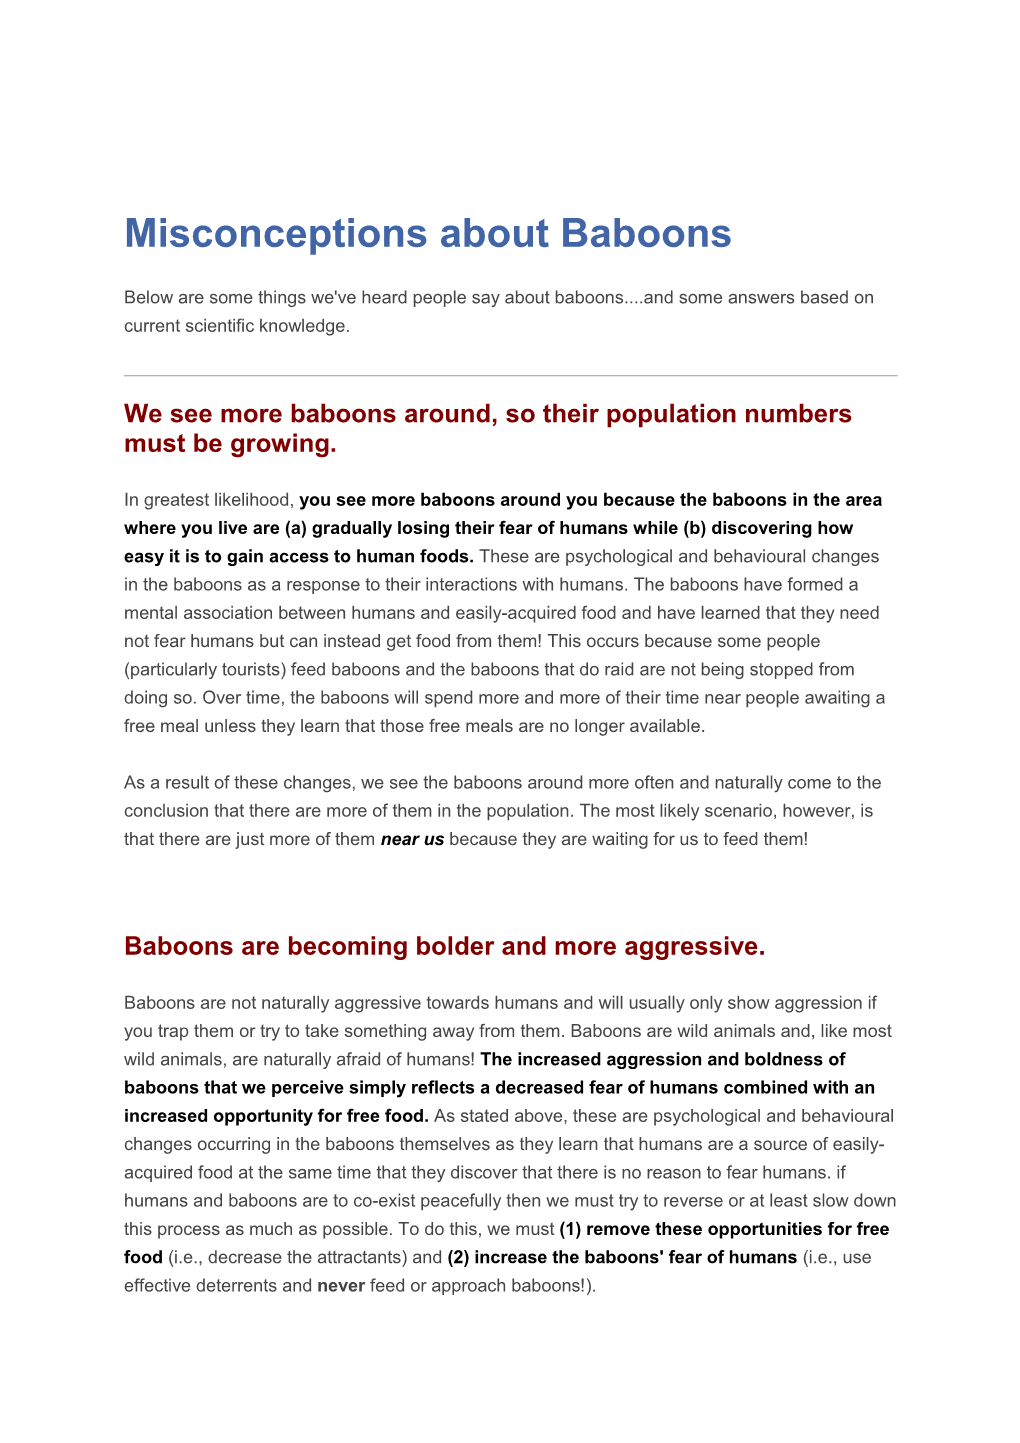 Misconceptions About Baboons